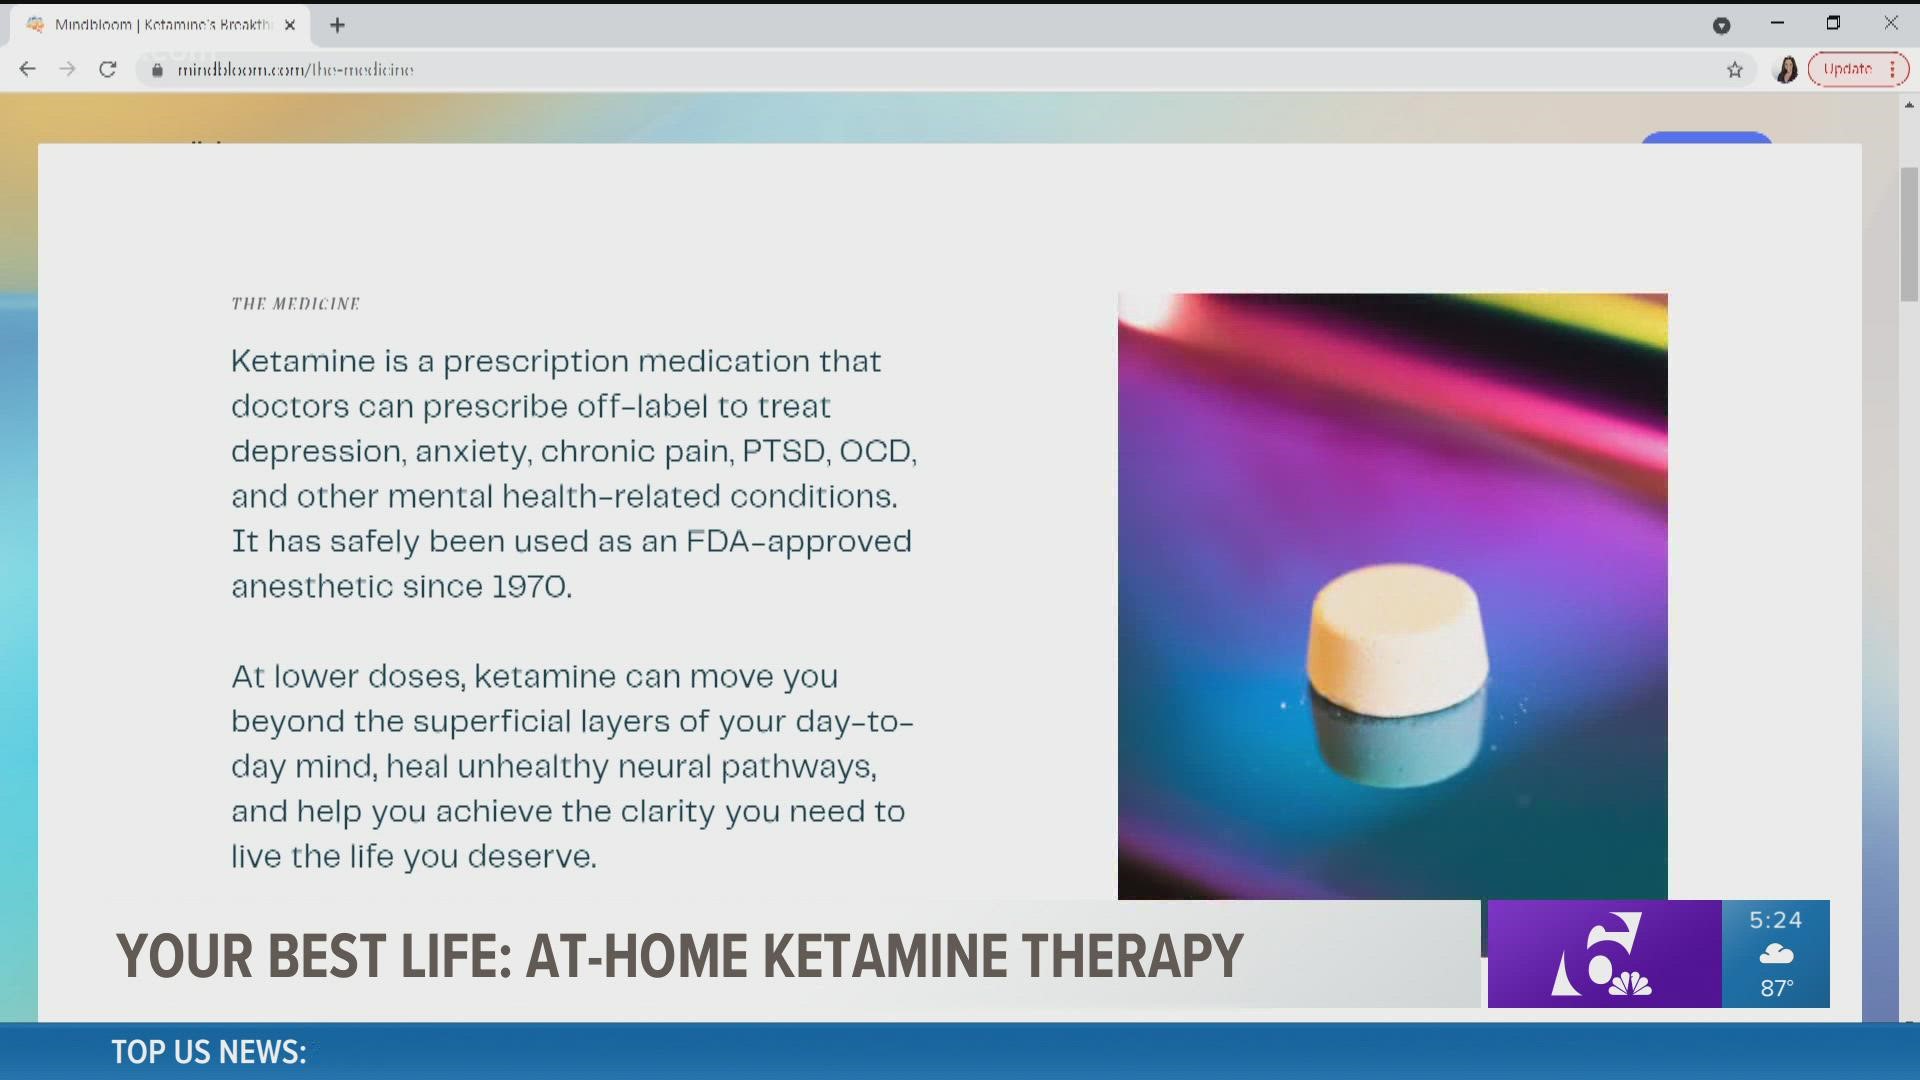 Anxiety and depression affect millions of Americans each year. Mindbloom is helping them feel better through at-home ketamine therapy.